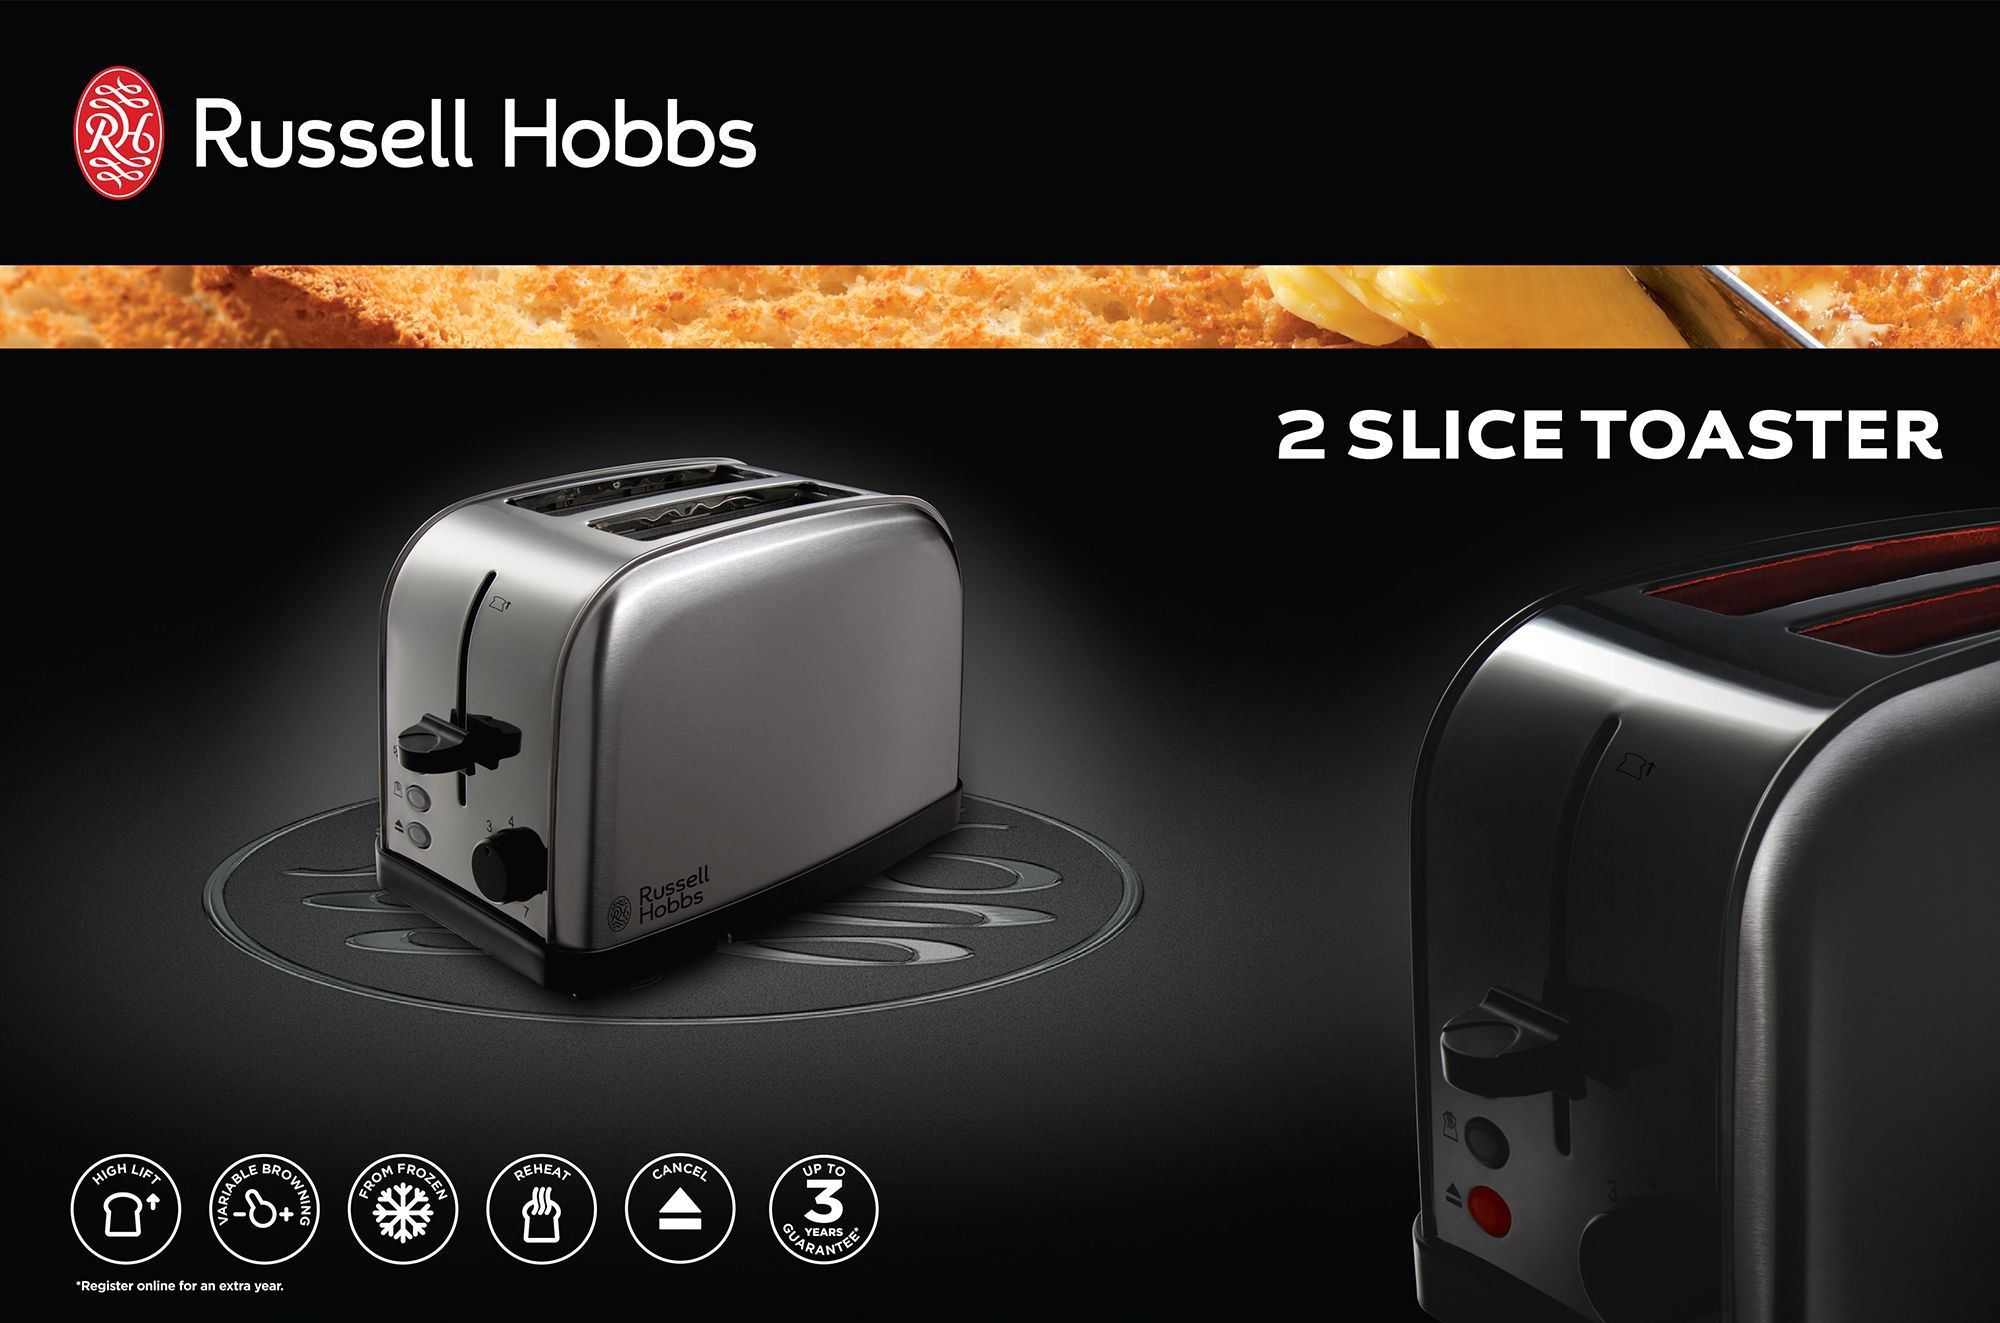 Negative: Russell Hobbs Microchip Toaster - Canterbury Museum